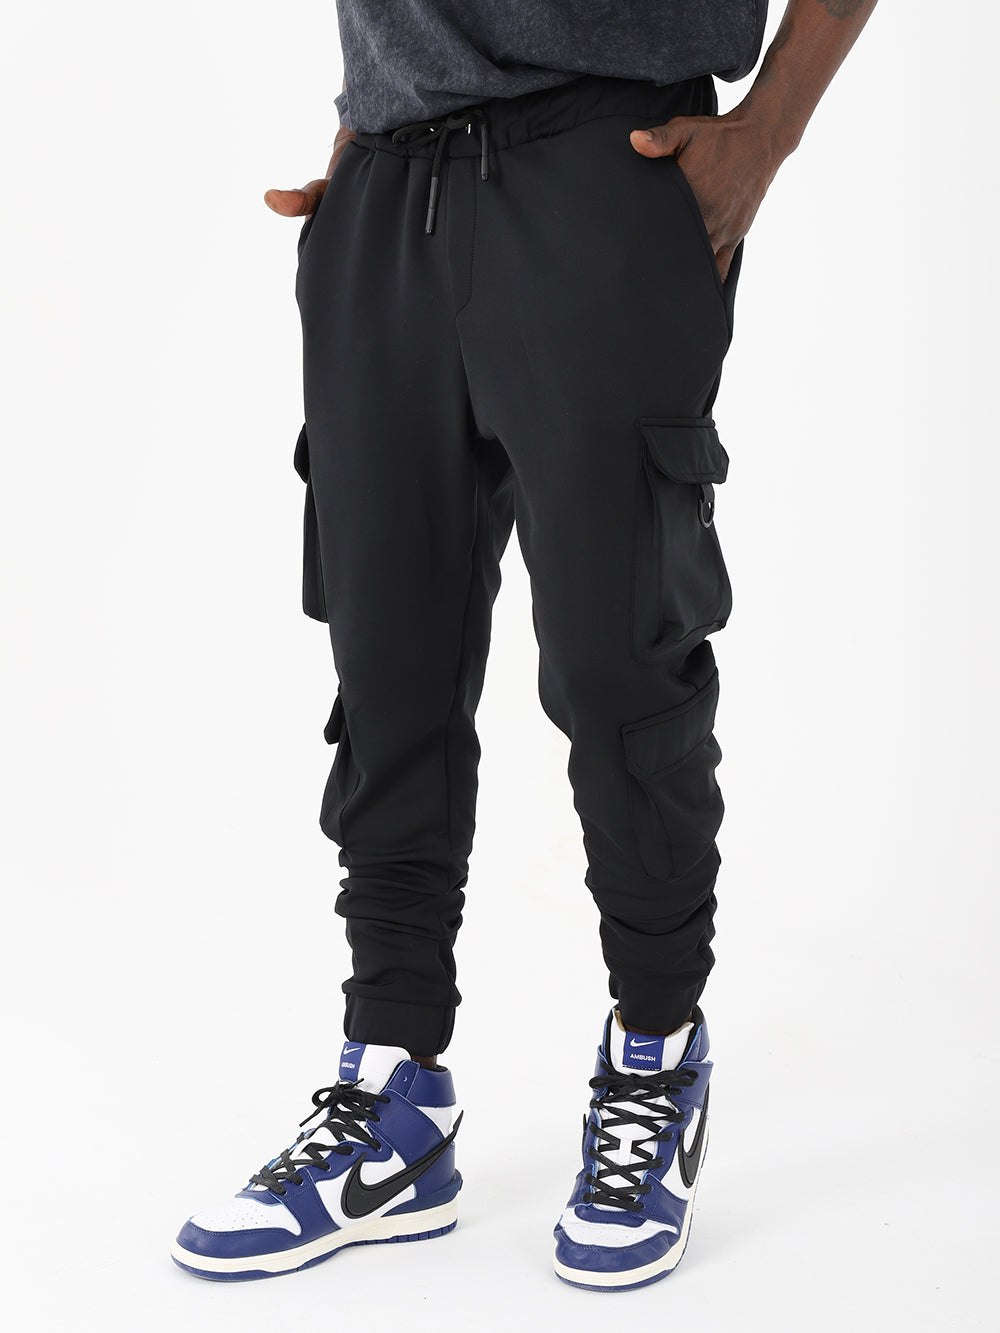 A man wearing VENTURA JOGGERS ankle cuffs and sneakers.